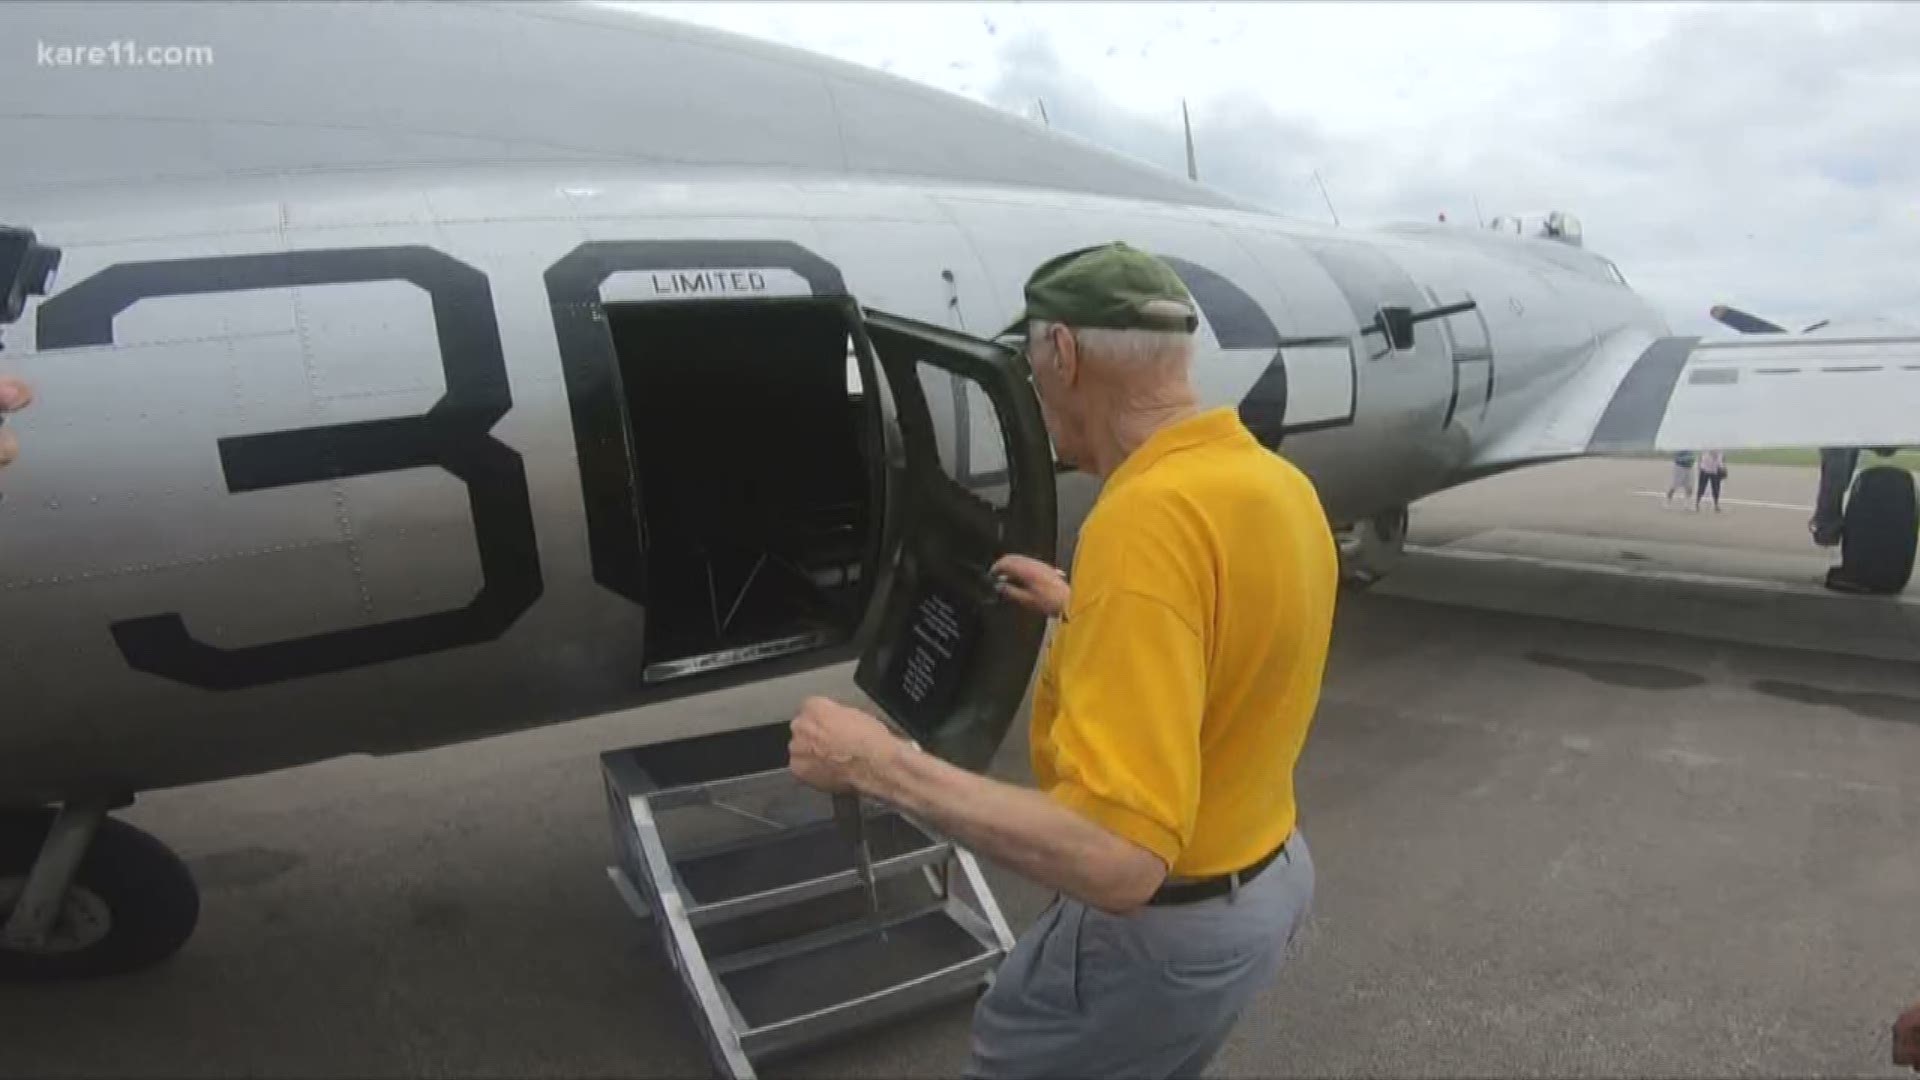 "After all these years, flying in a B-17. Unbelievable."